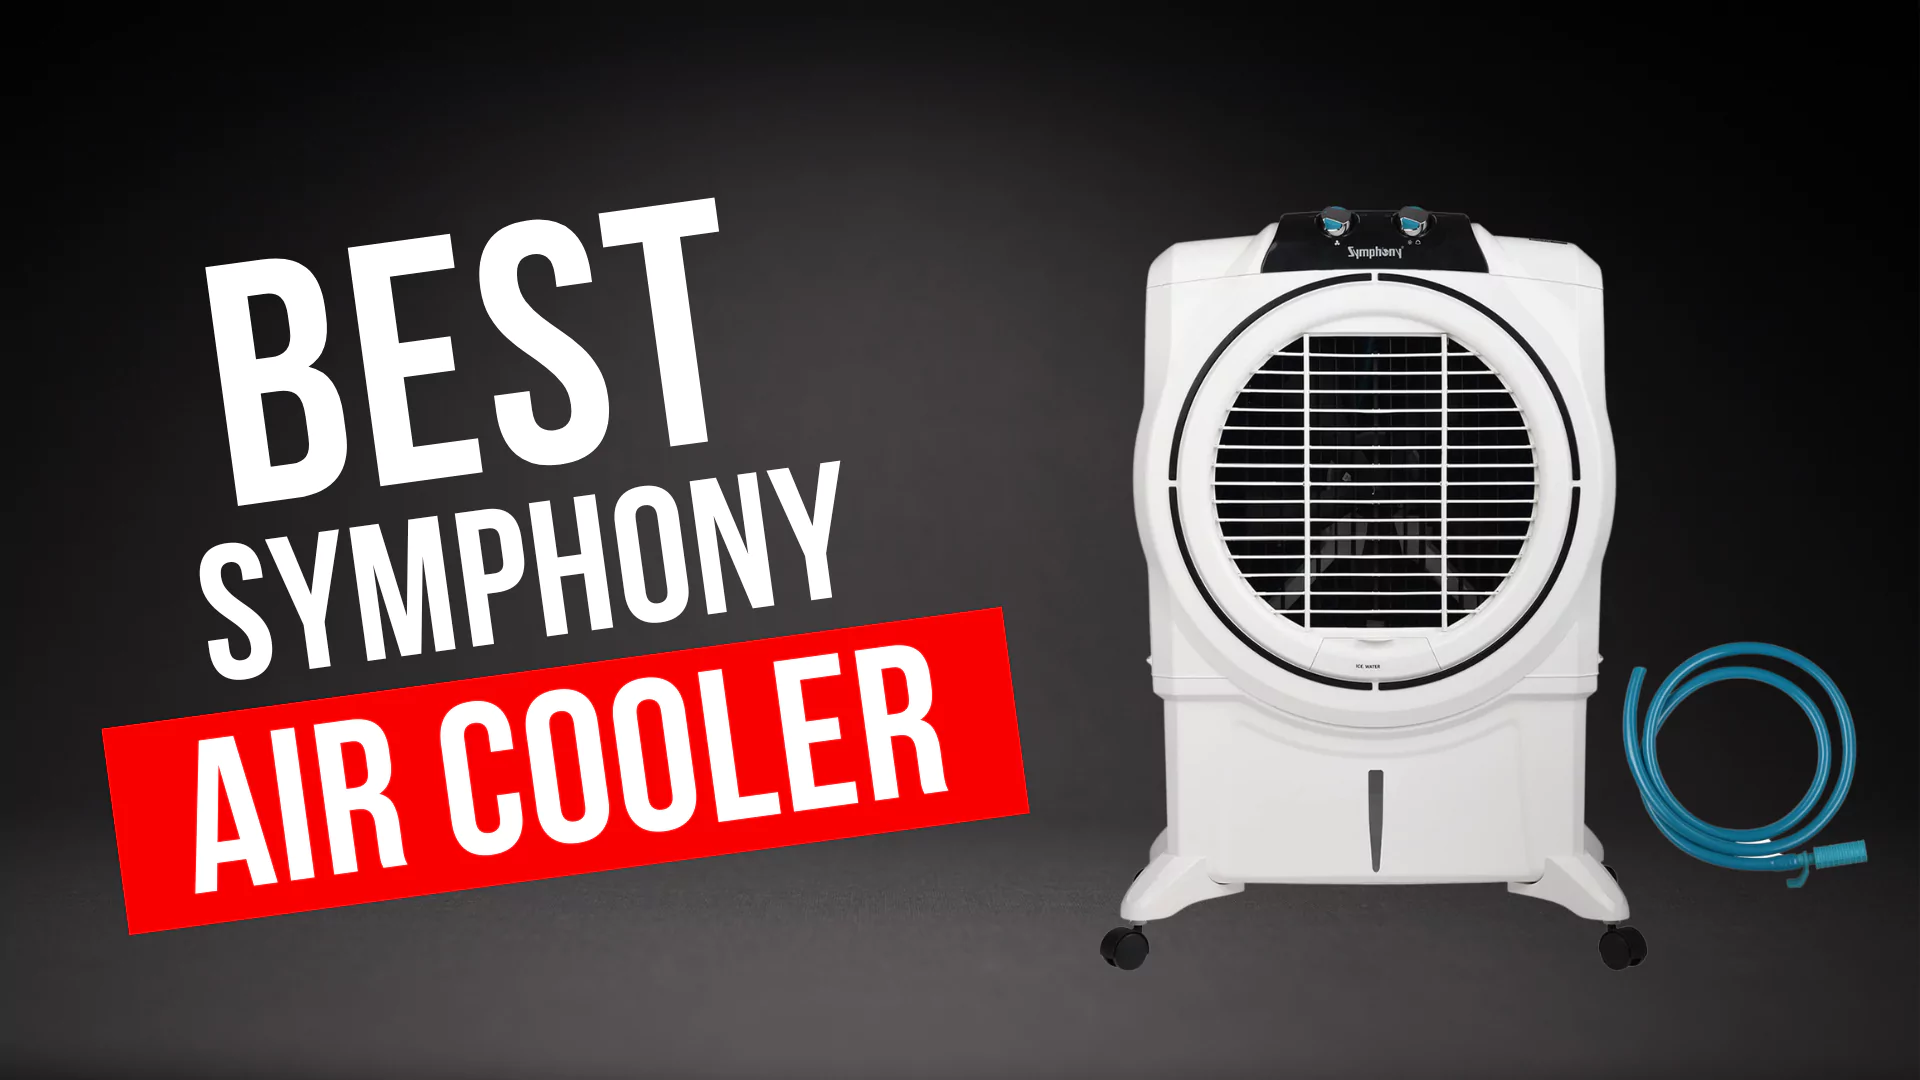 Best Symphony Air Cooler in India